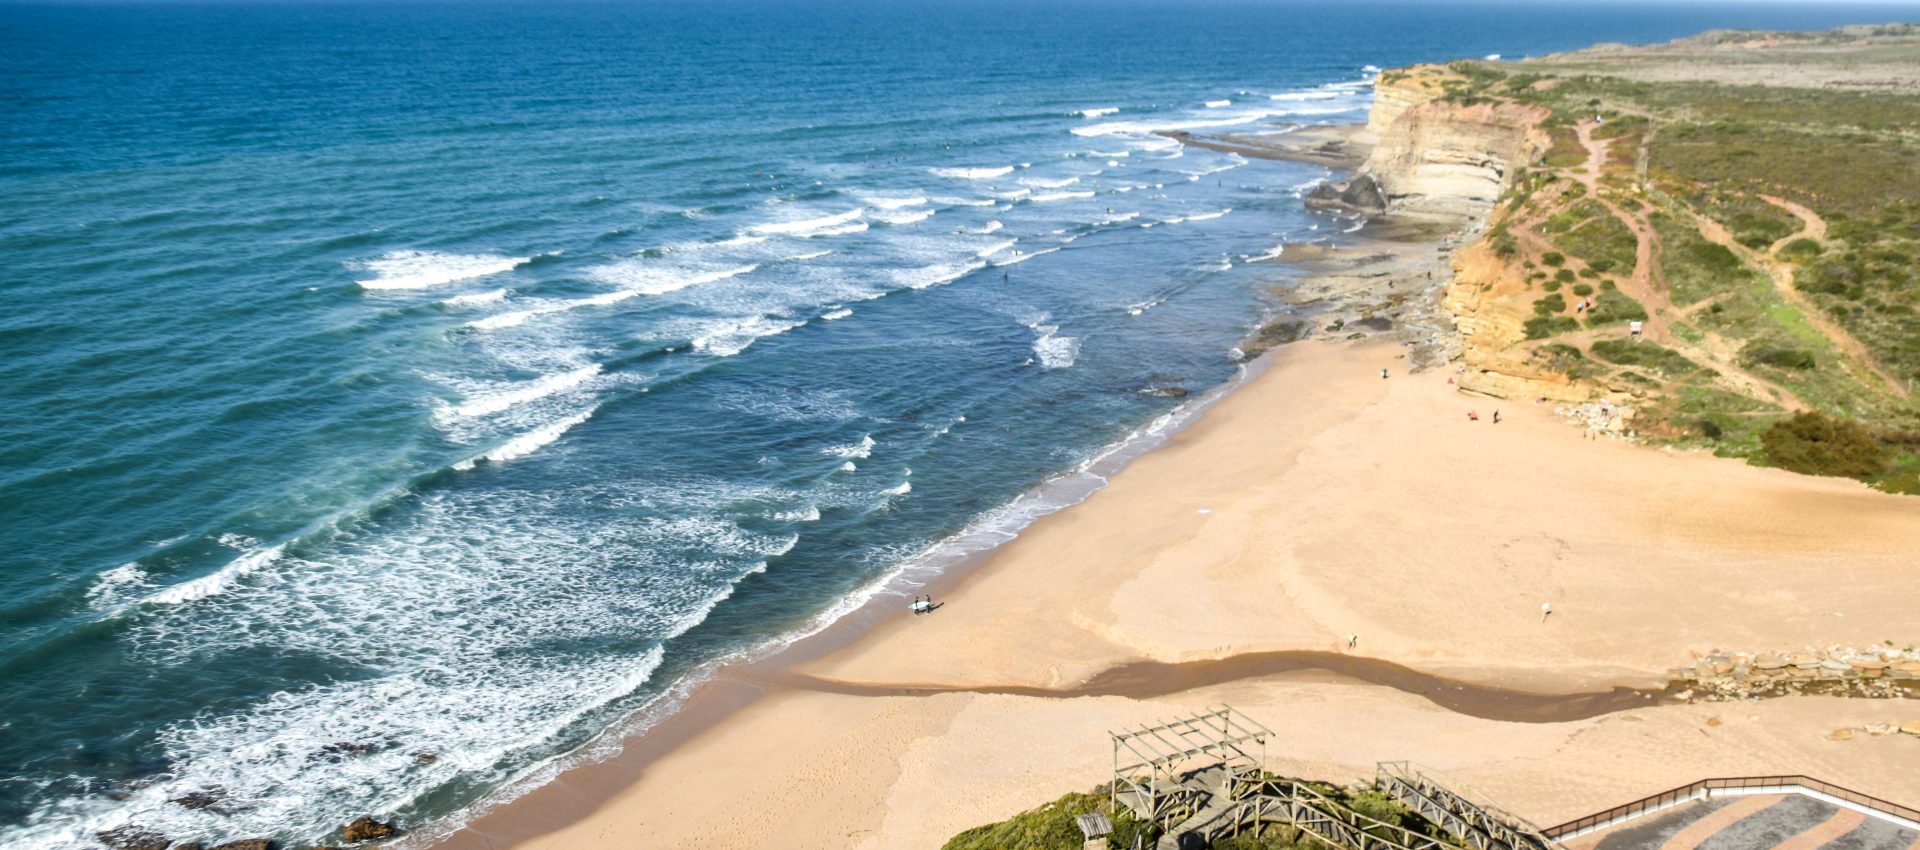 The coolest surf spot in Ericeira - Ribeira D’Ilhas.